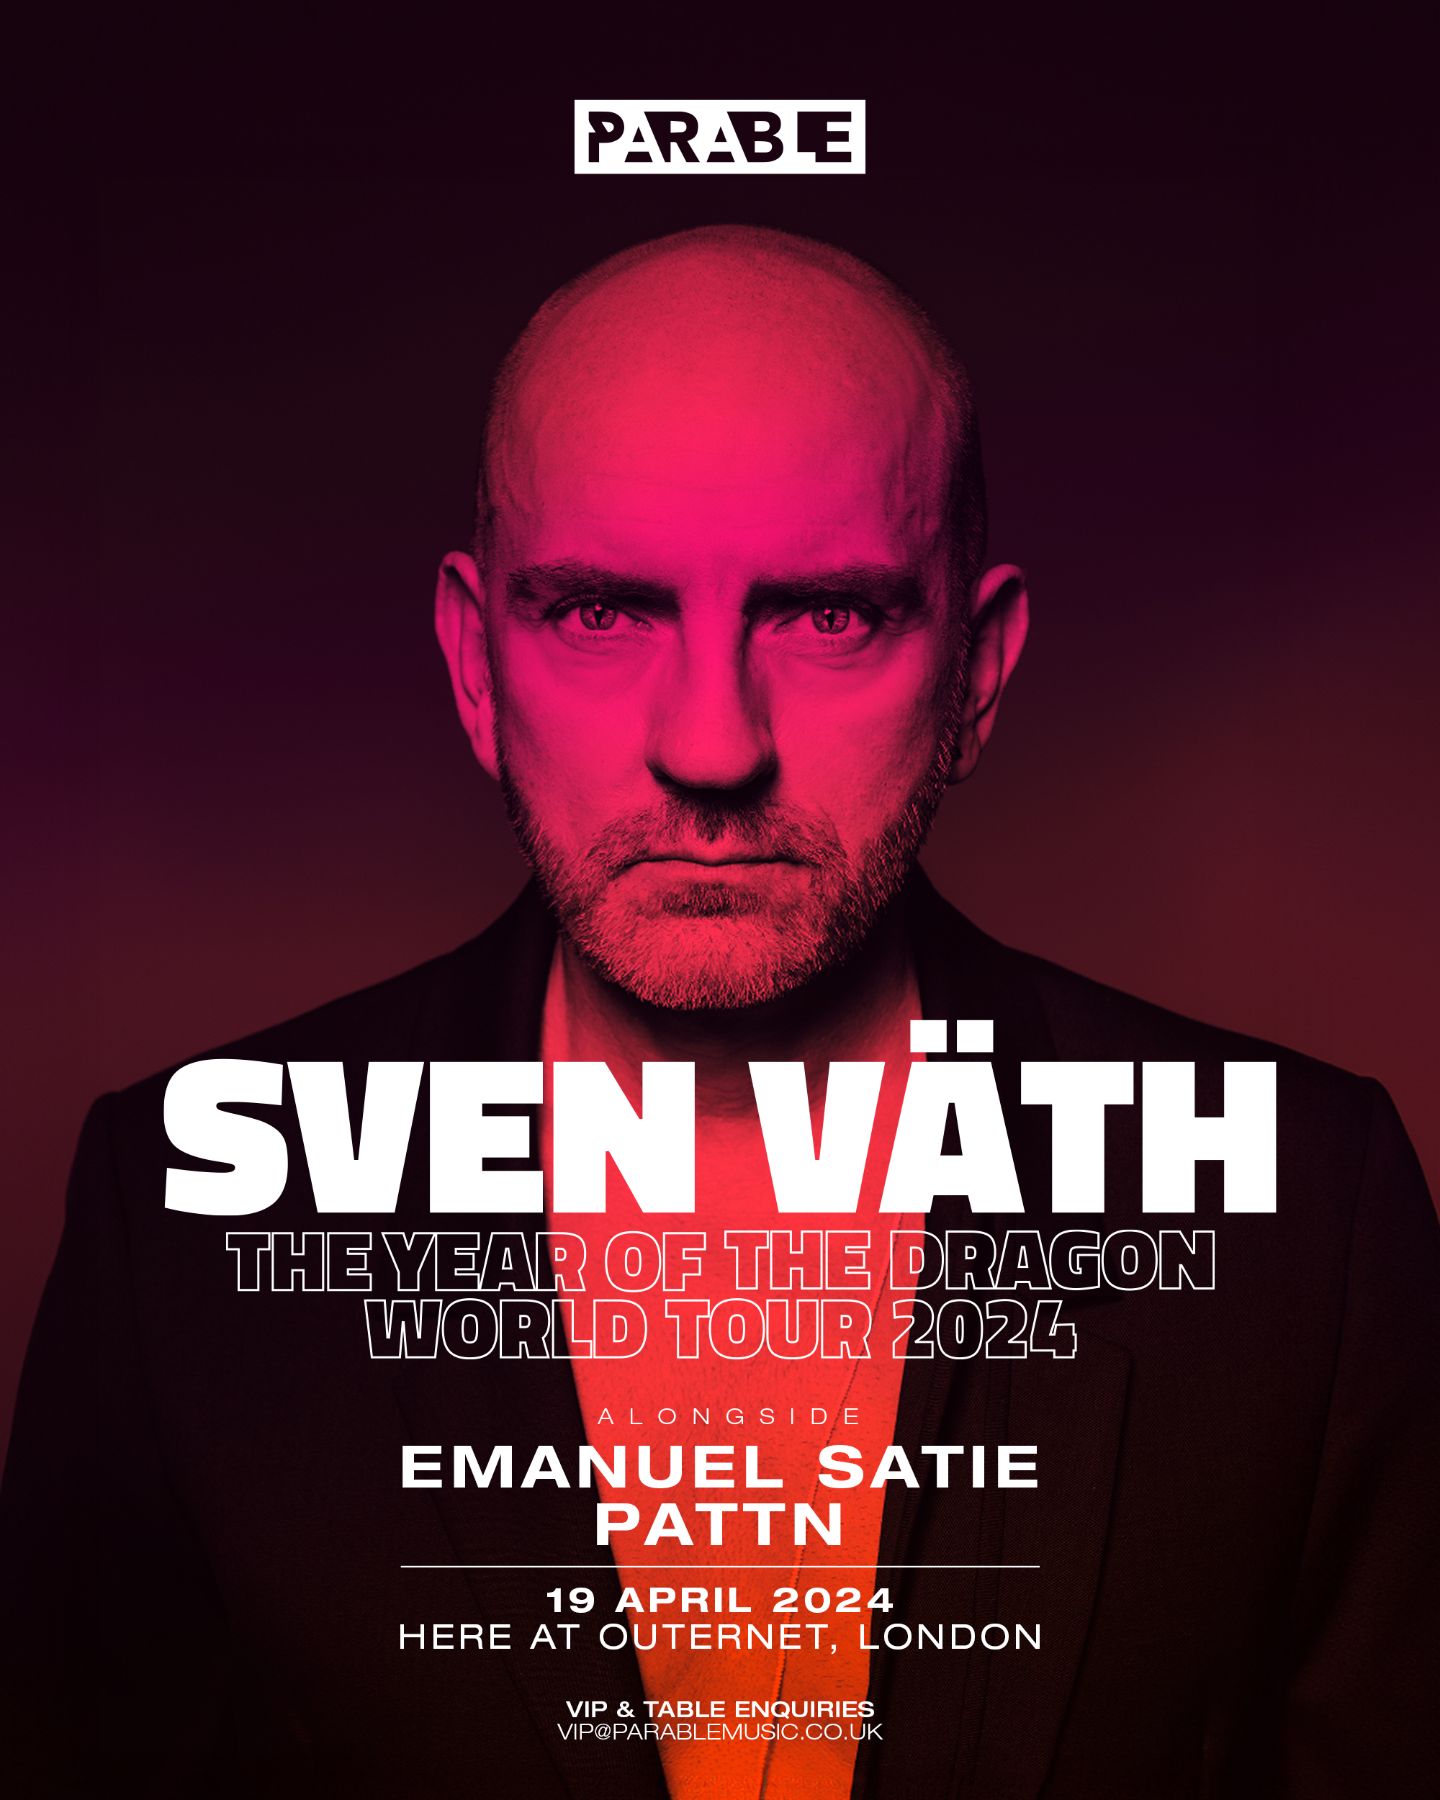 SVEN VÄTH, The Year Of The Dragon World Tour 2024